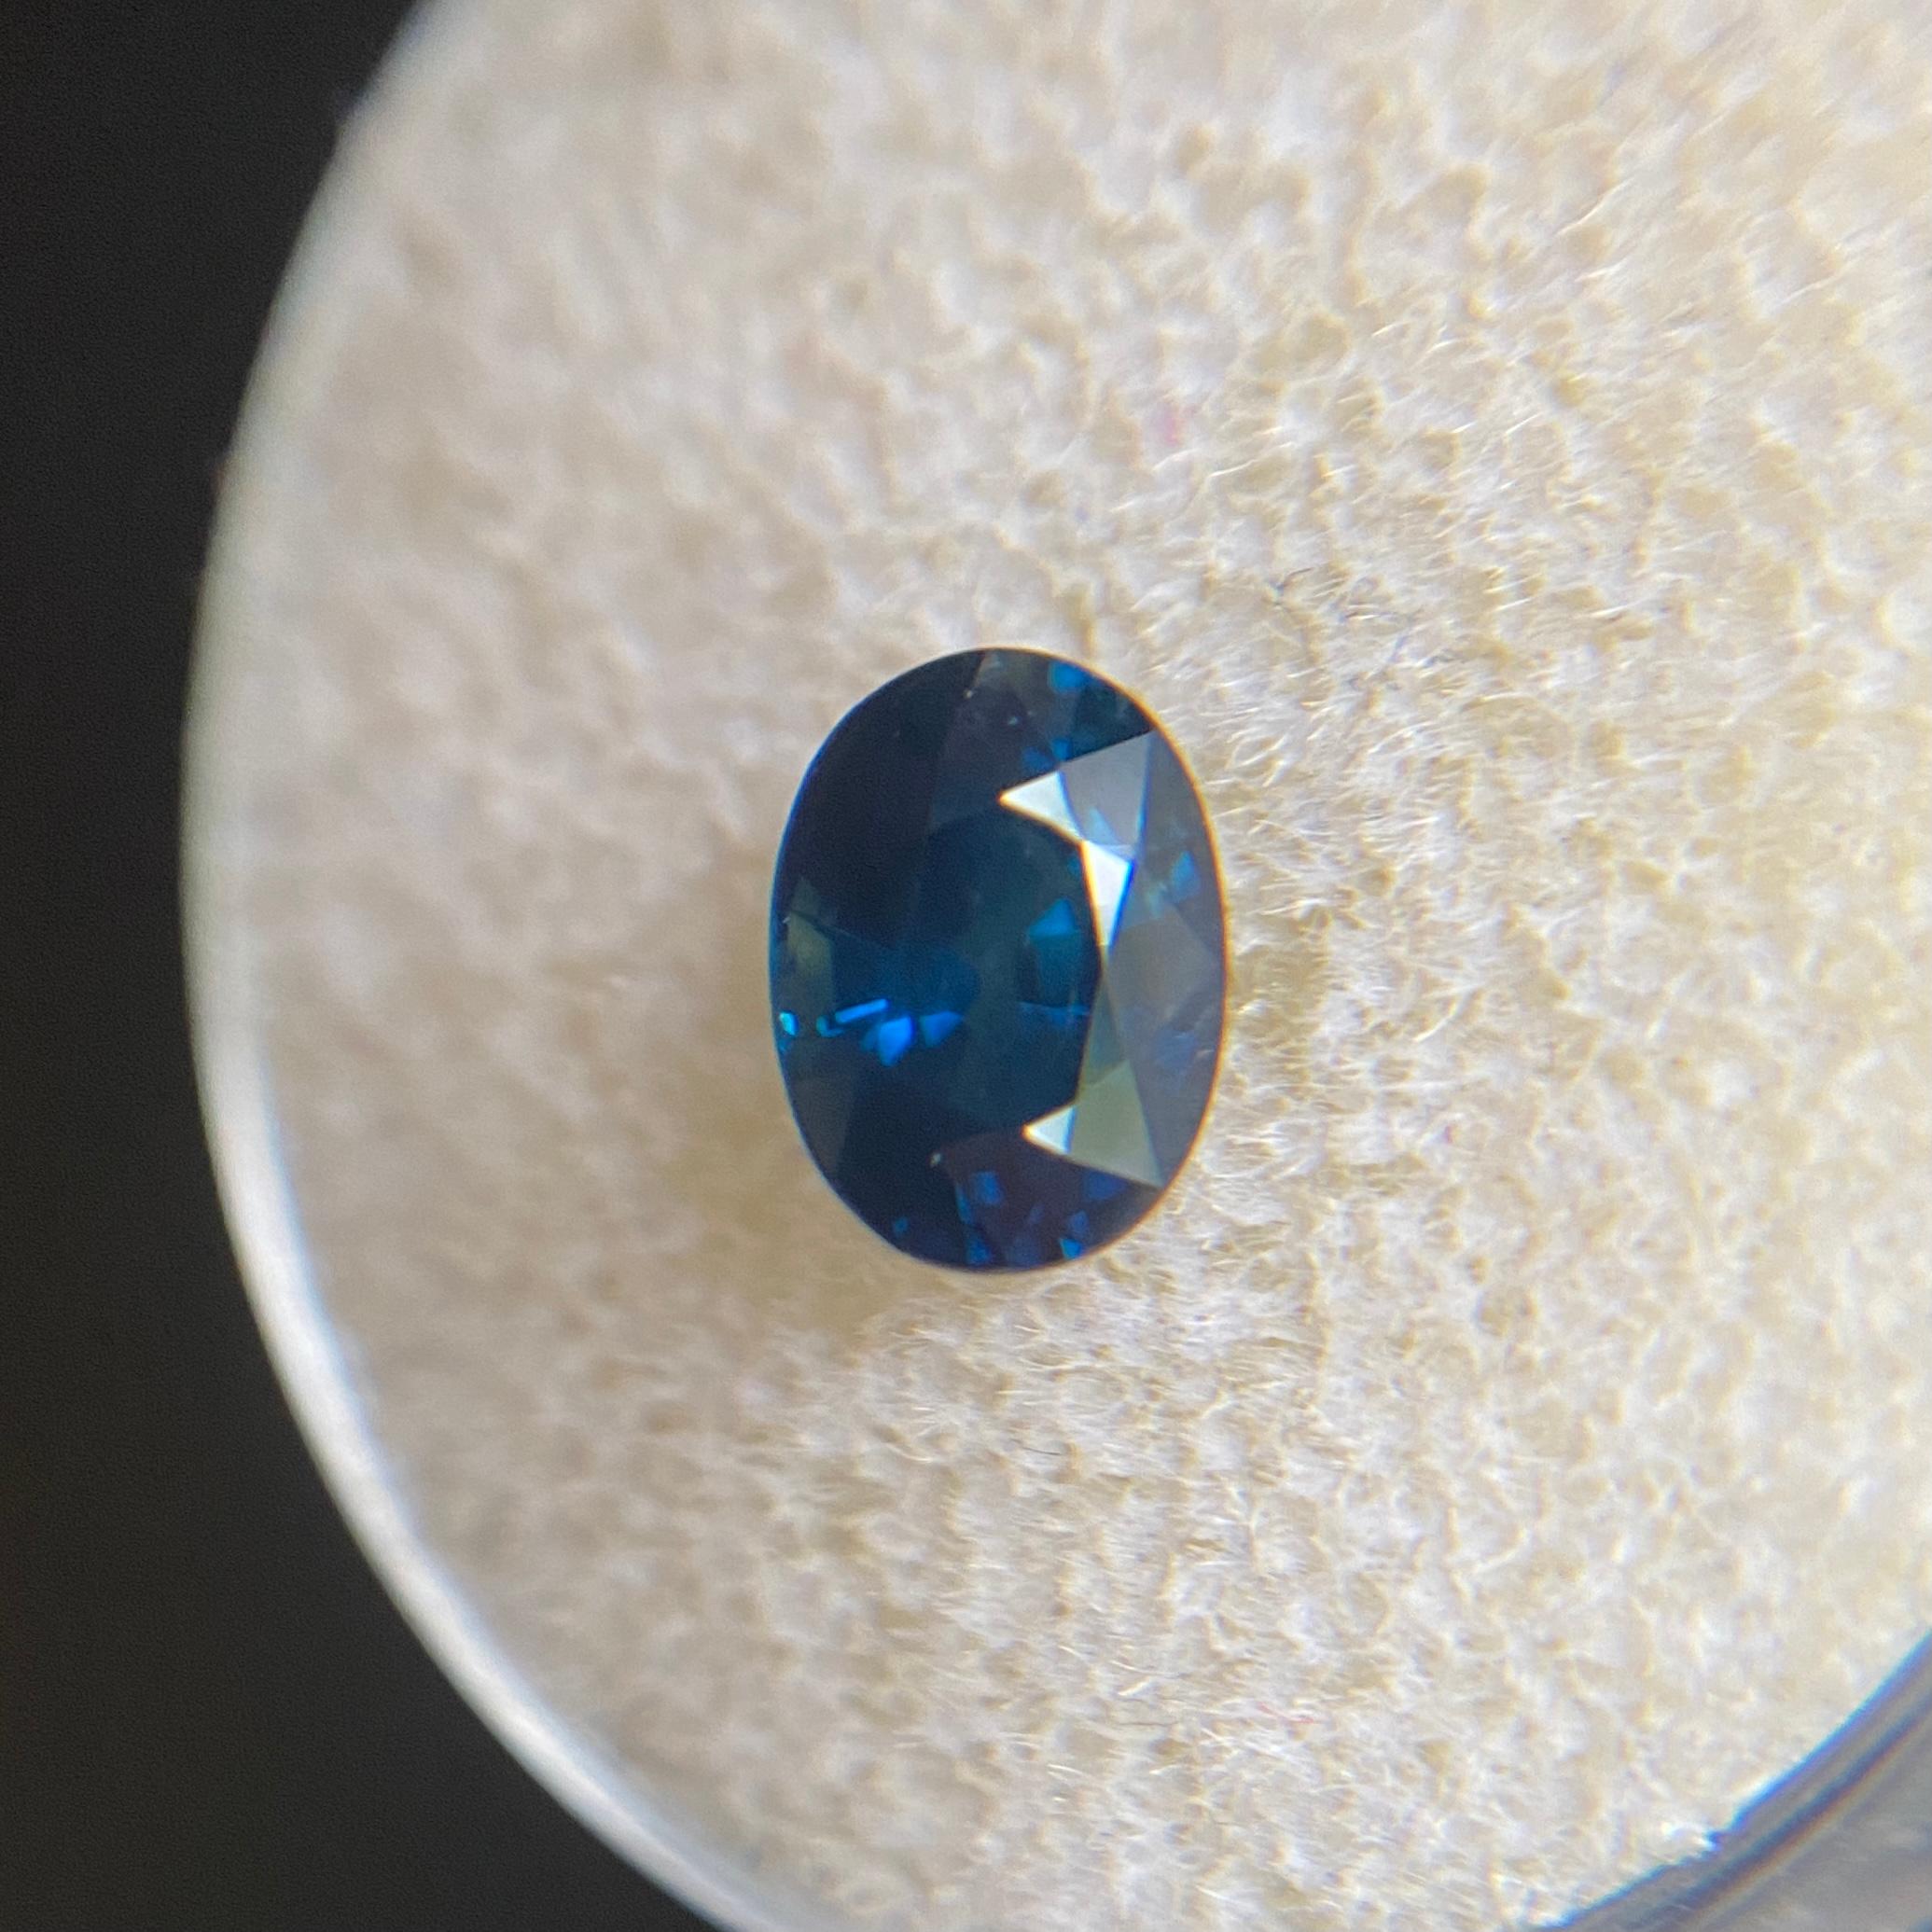 Fine Natural Australian Blue Sapphire Gemstone.

1.29 Carat with a beautiful deep fine blue colour and good clarity, a clean stone with only some small natural inclusions visible when looking closely.

Also has an excellent oval cut and ideal polish